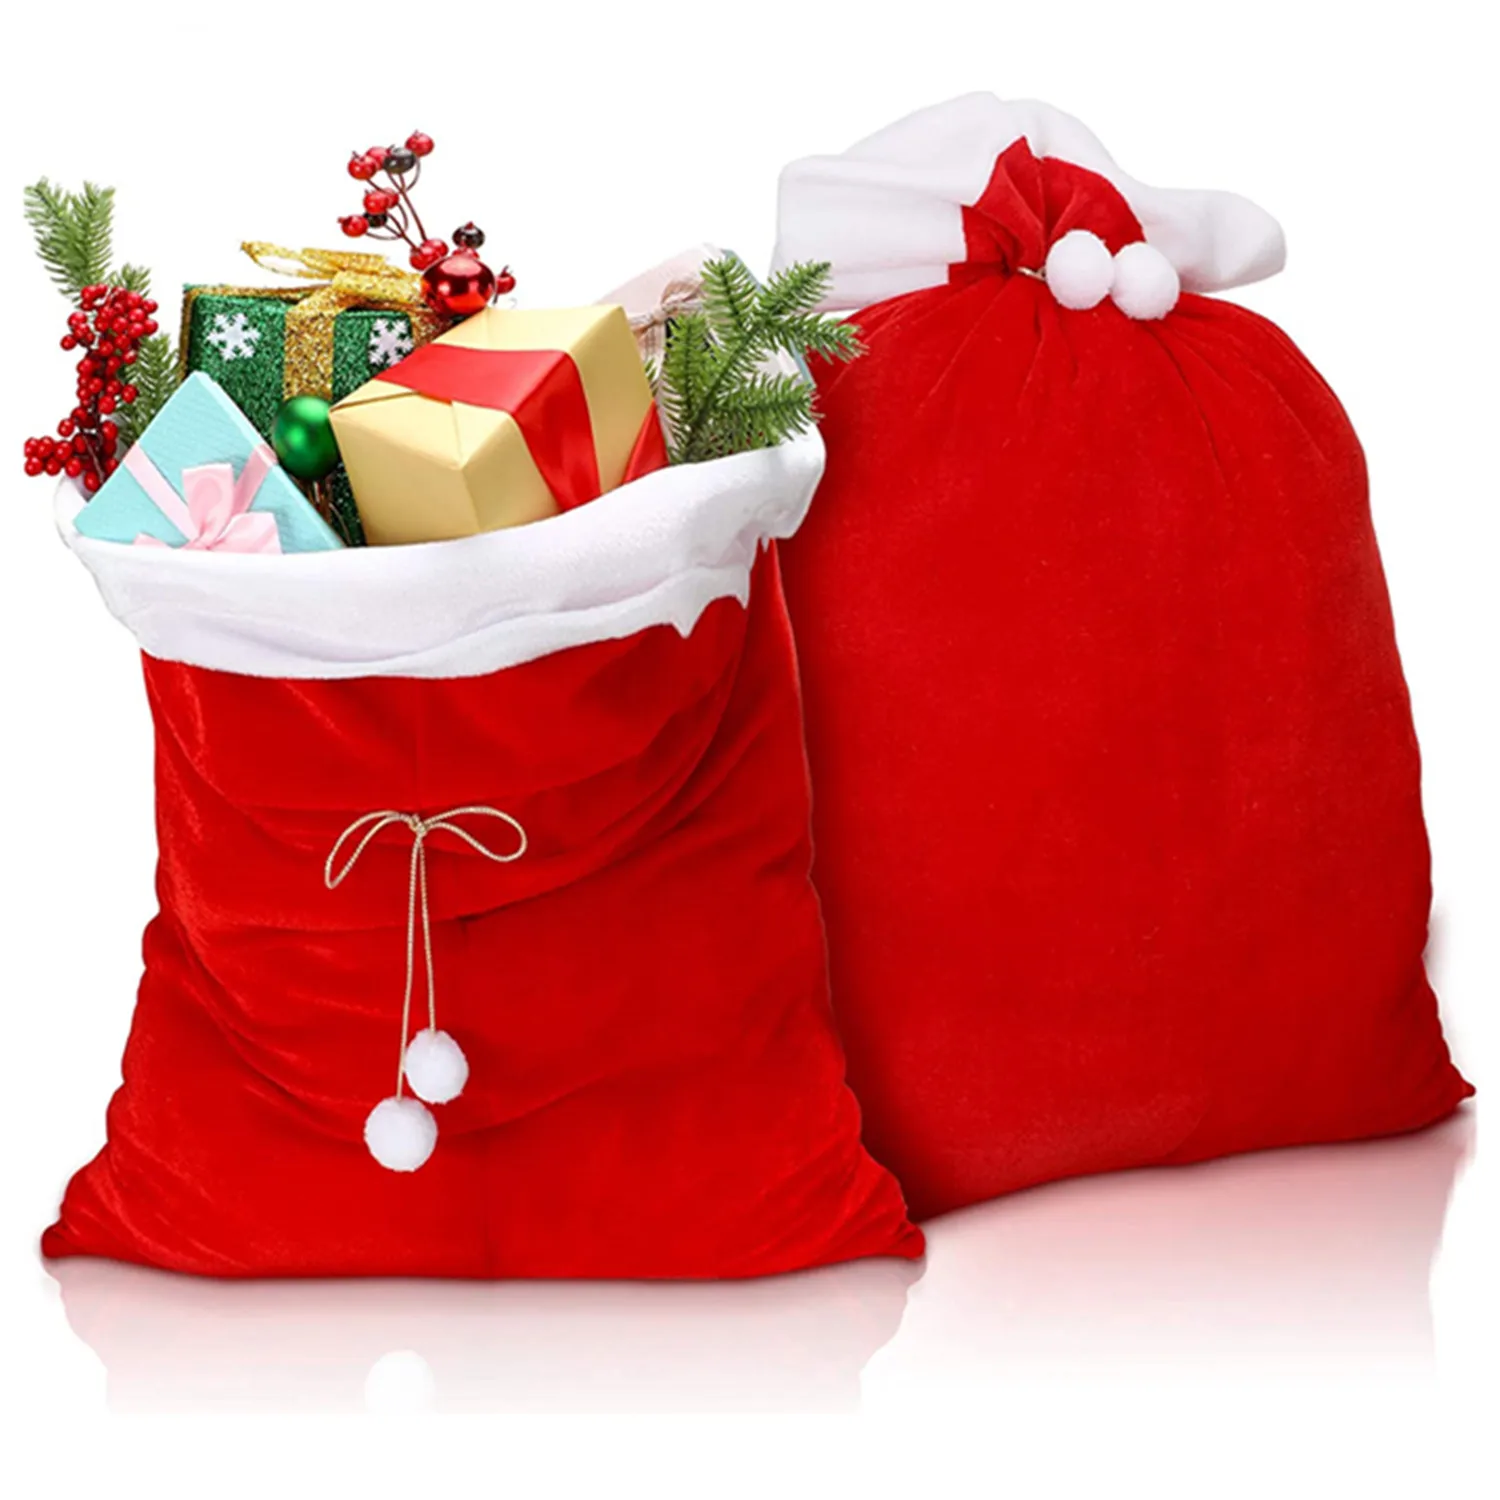 

Christmas Red Velvet Santa Claus Bags With Drawstring Cord, Large Present Sack Bags For Present Toys, Storage Bags Party Supply